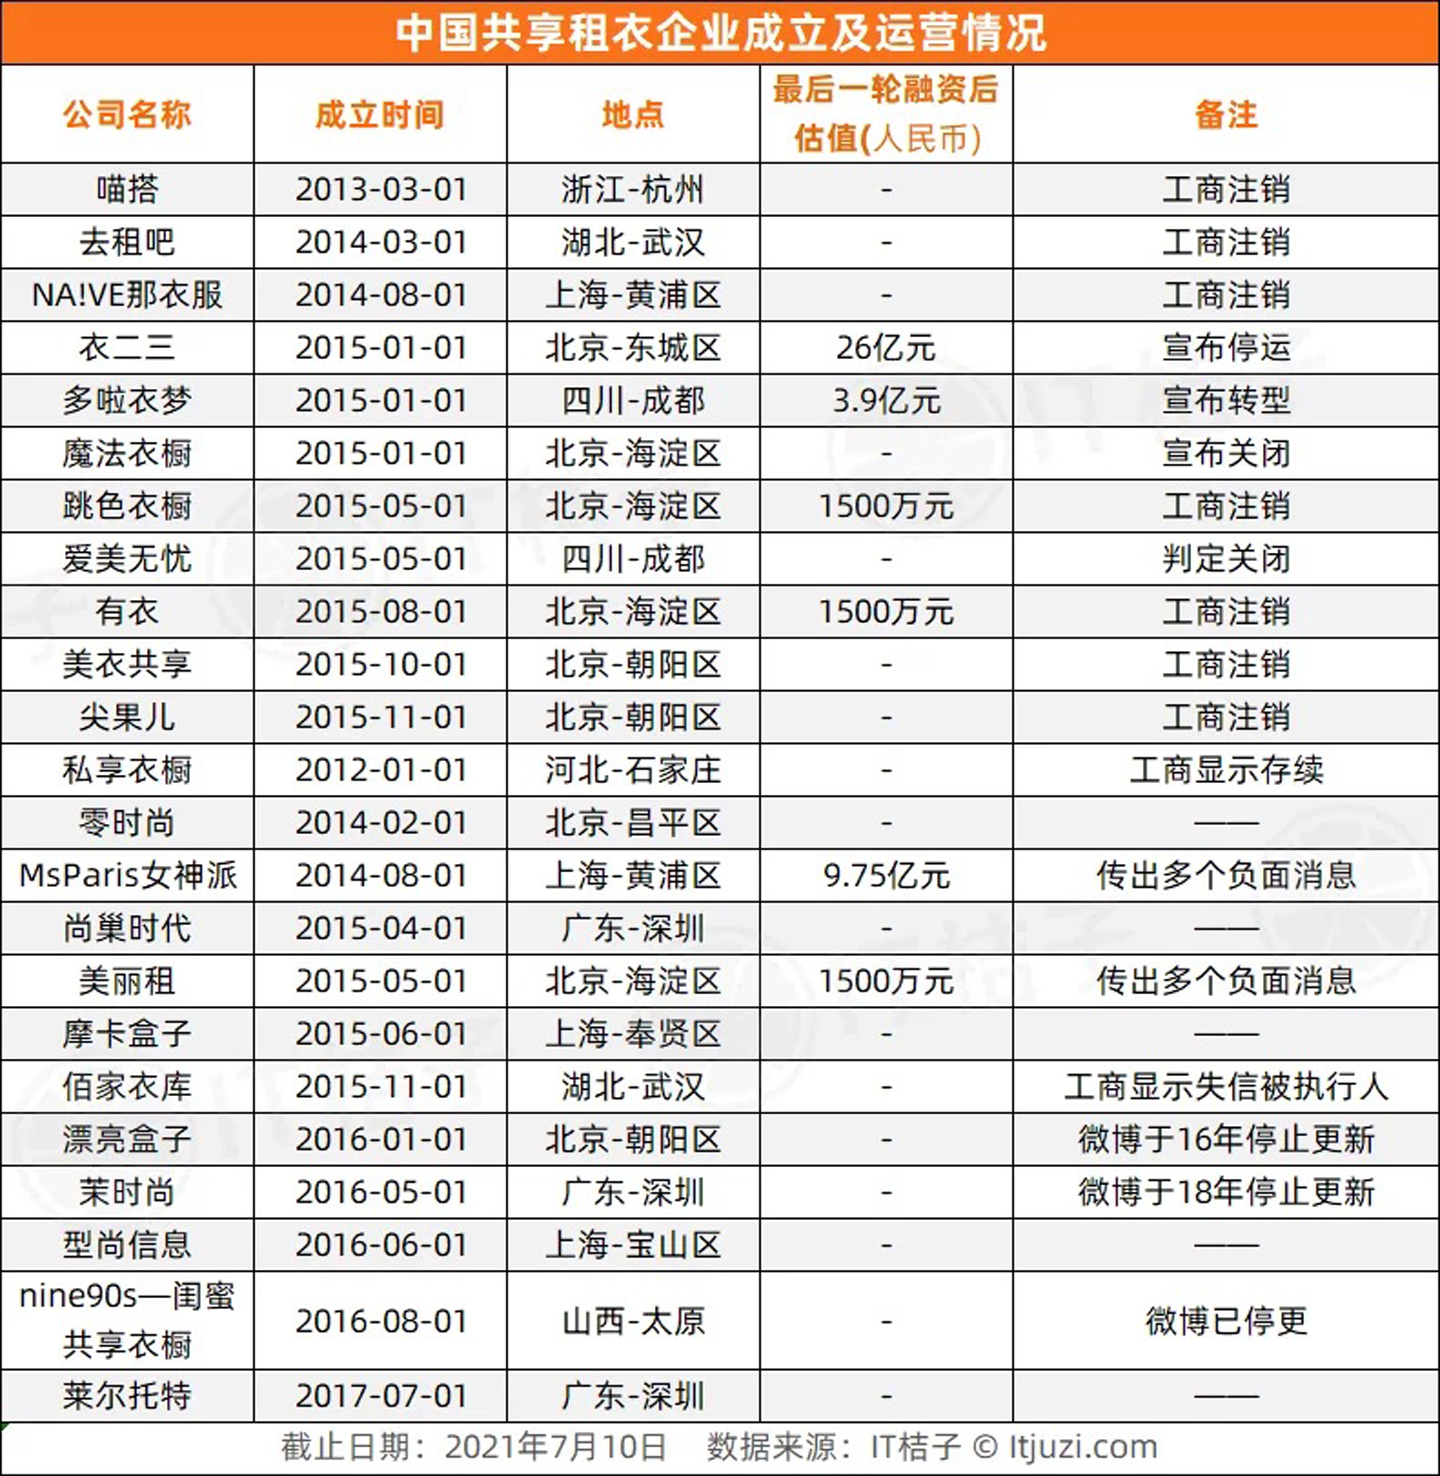 Data from itjuzi.com. The establishment and operation of shared clothing rental companies in China: in 2015 alone, 12 shared clothing rental enterprises were established in China